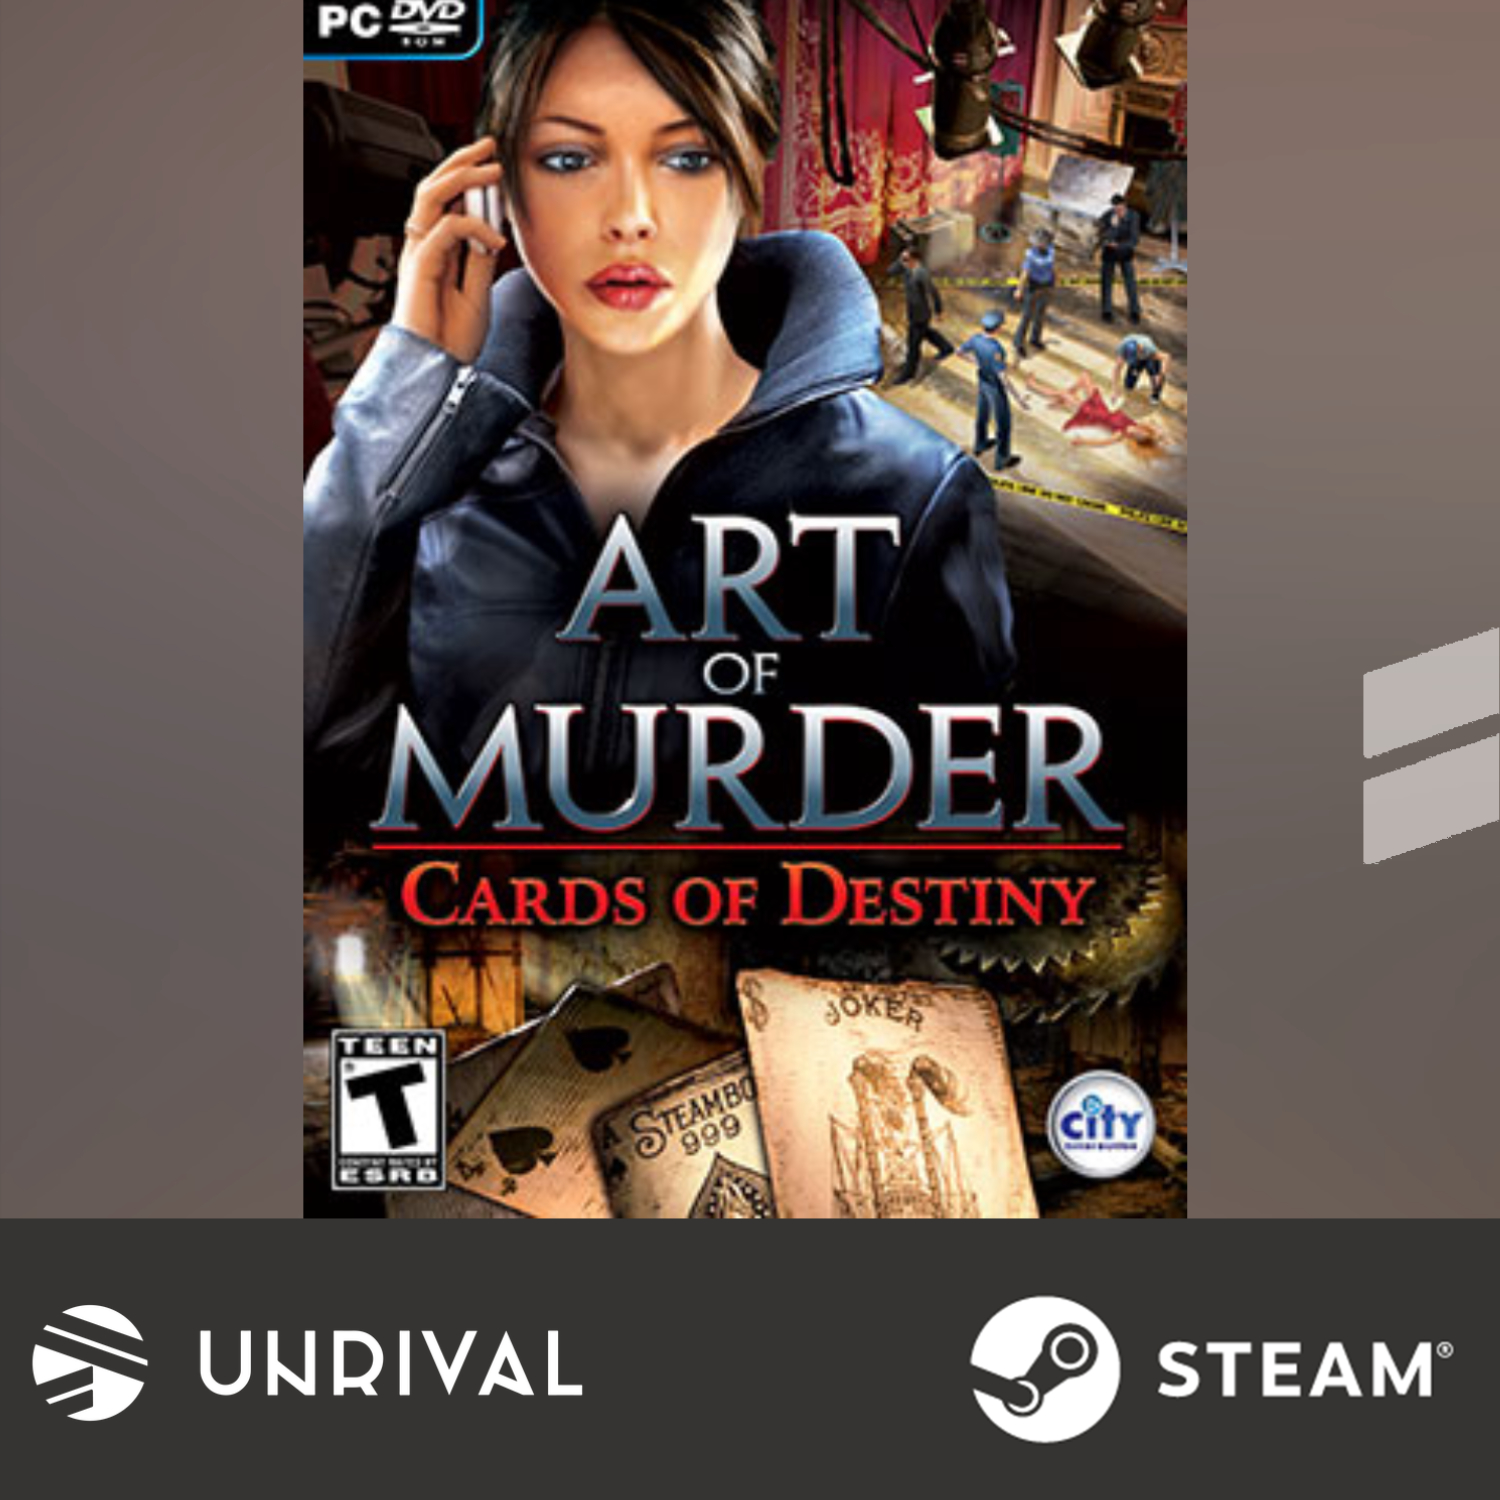 Art of Murder: Cards of Destiny PC Digital Download Game (Single Player) - Unrival